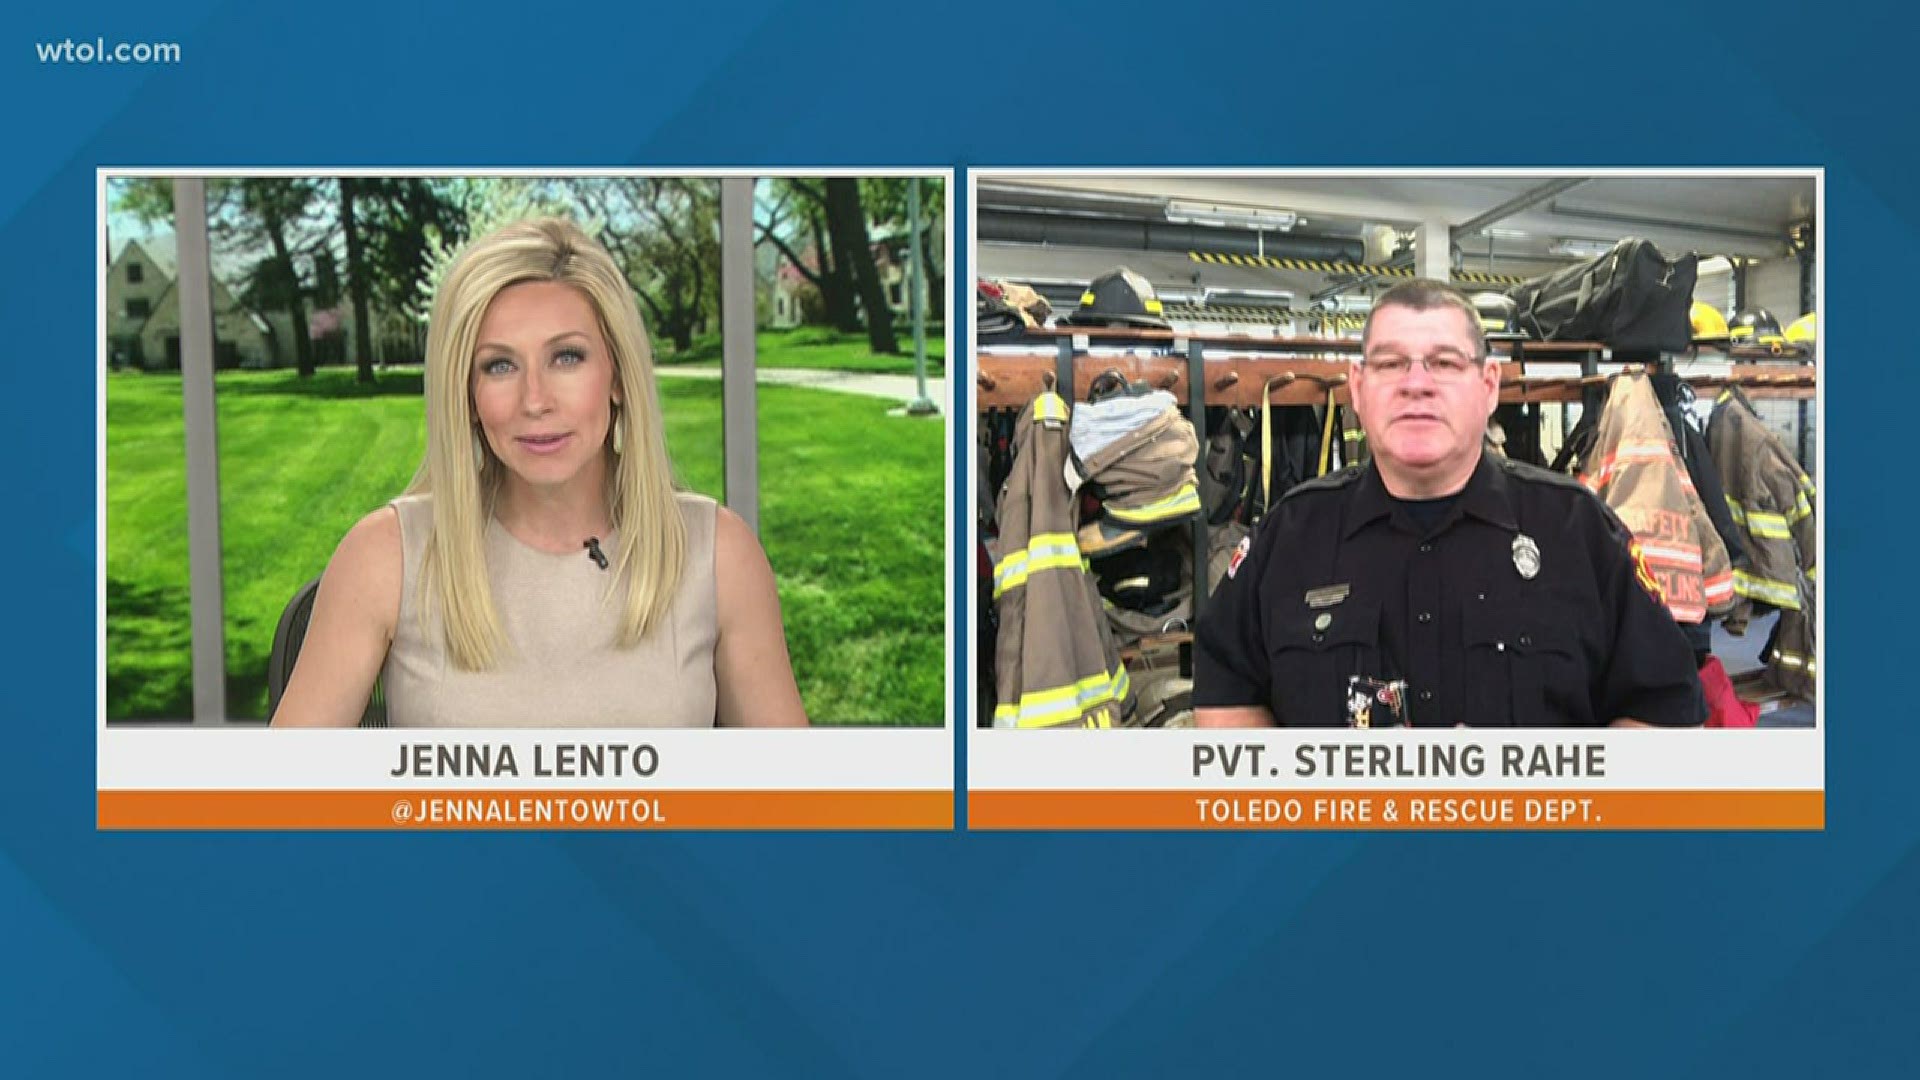 Spokesperson for the Toledo Fire and Rescue Department, Pvt. Sterling Rahe, talks about safety during Saturday's demonstrations in wake of George Floyd's death.